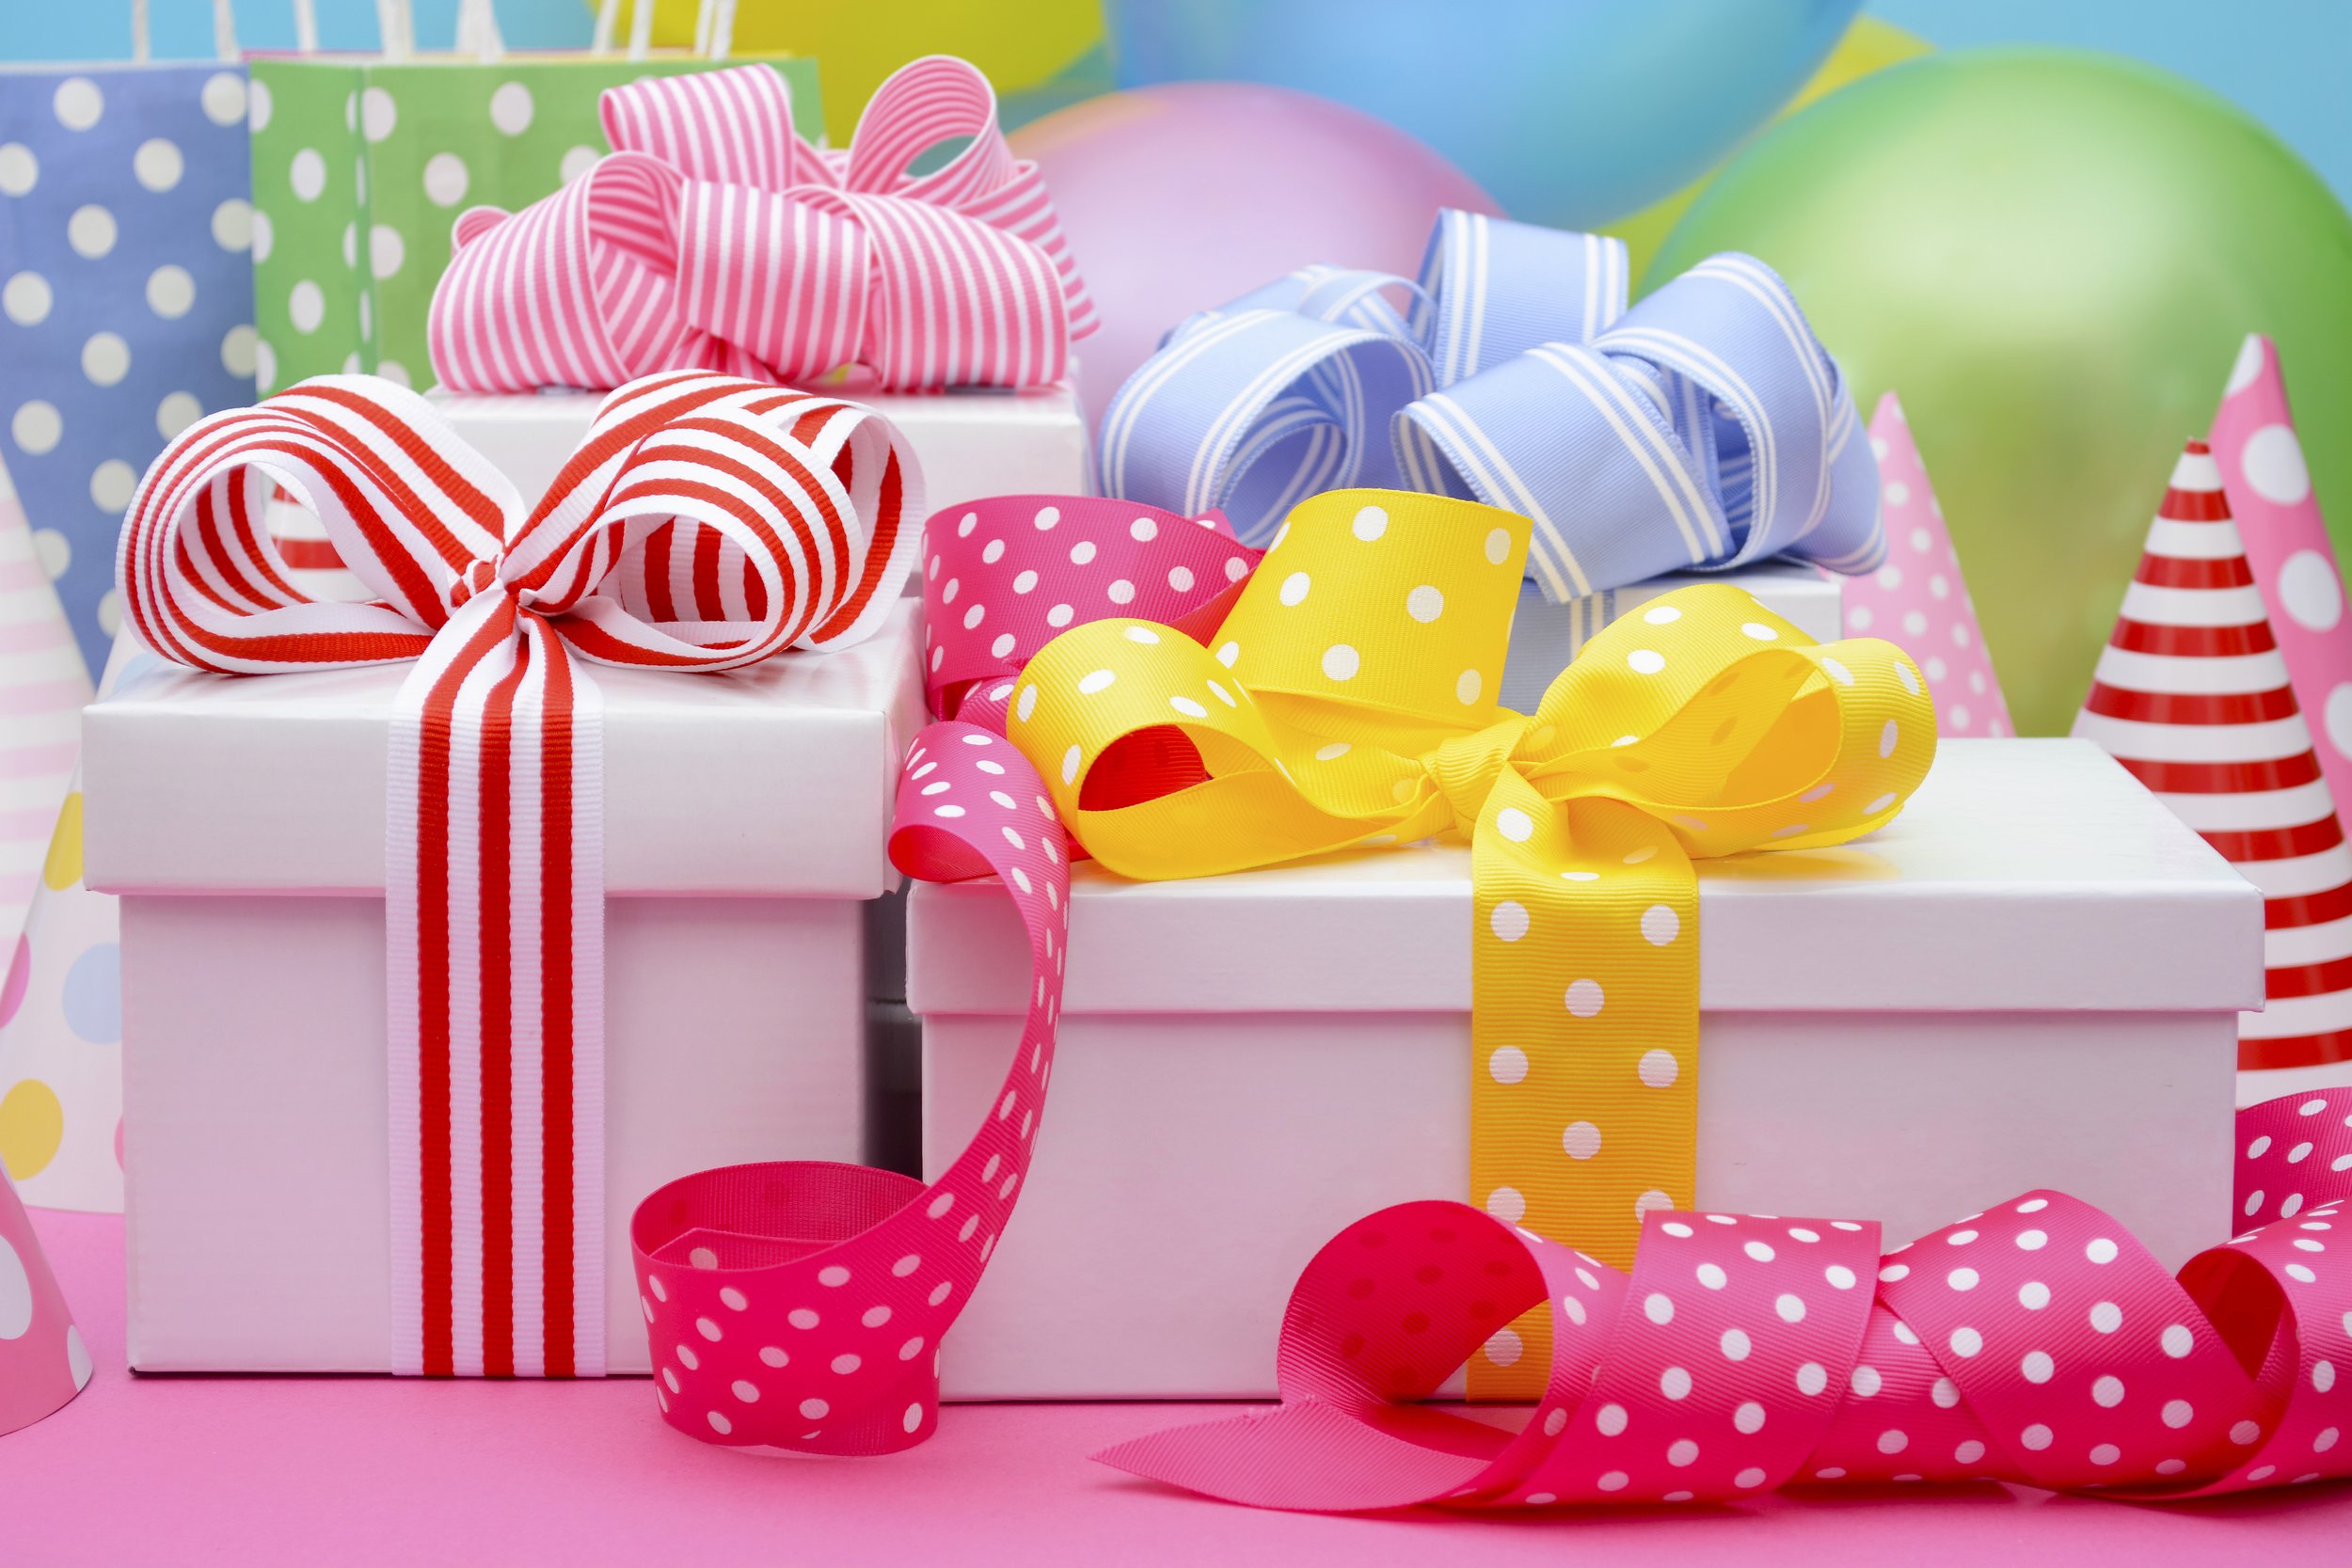 Colourful Parcels Birthday Gifts.jpg